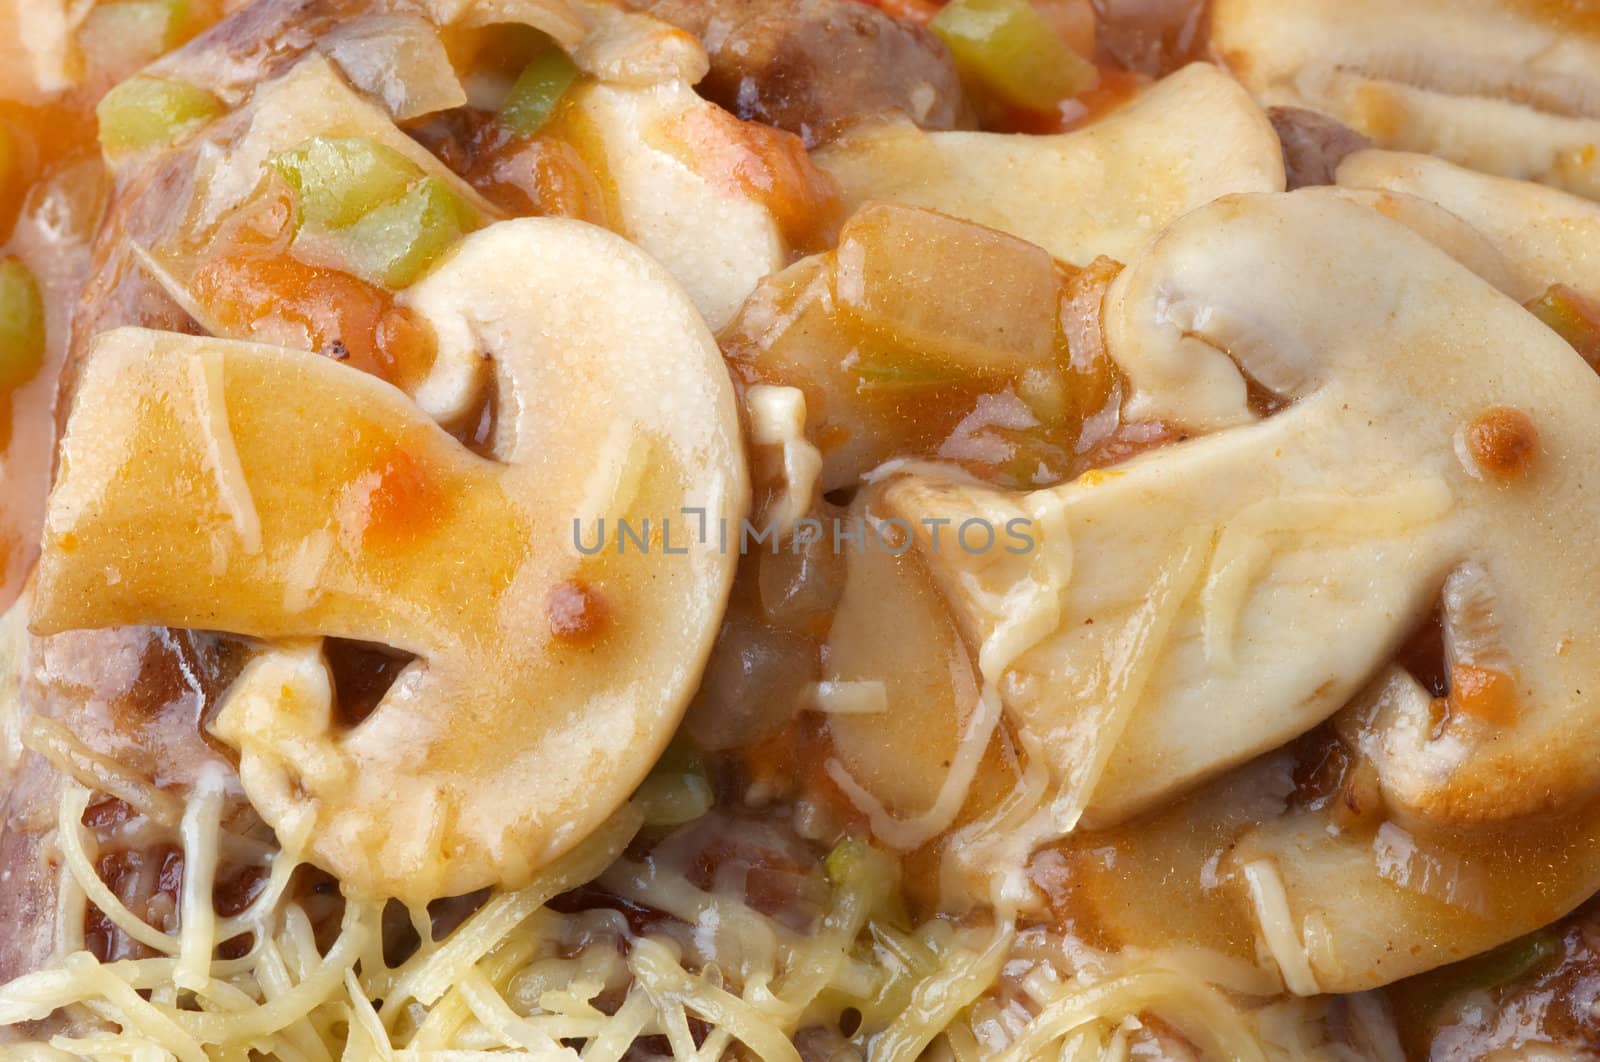 mushrooms, cheese and vegetables in sauce by starush